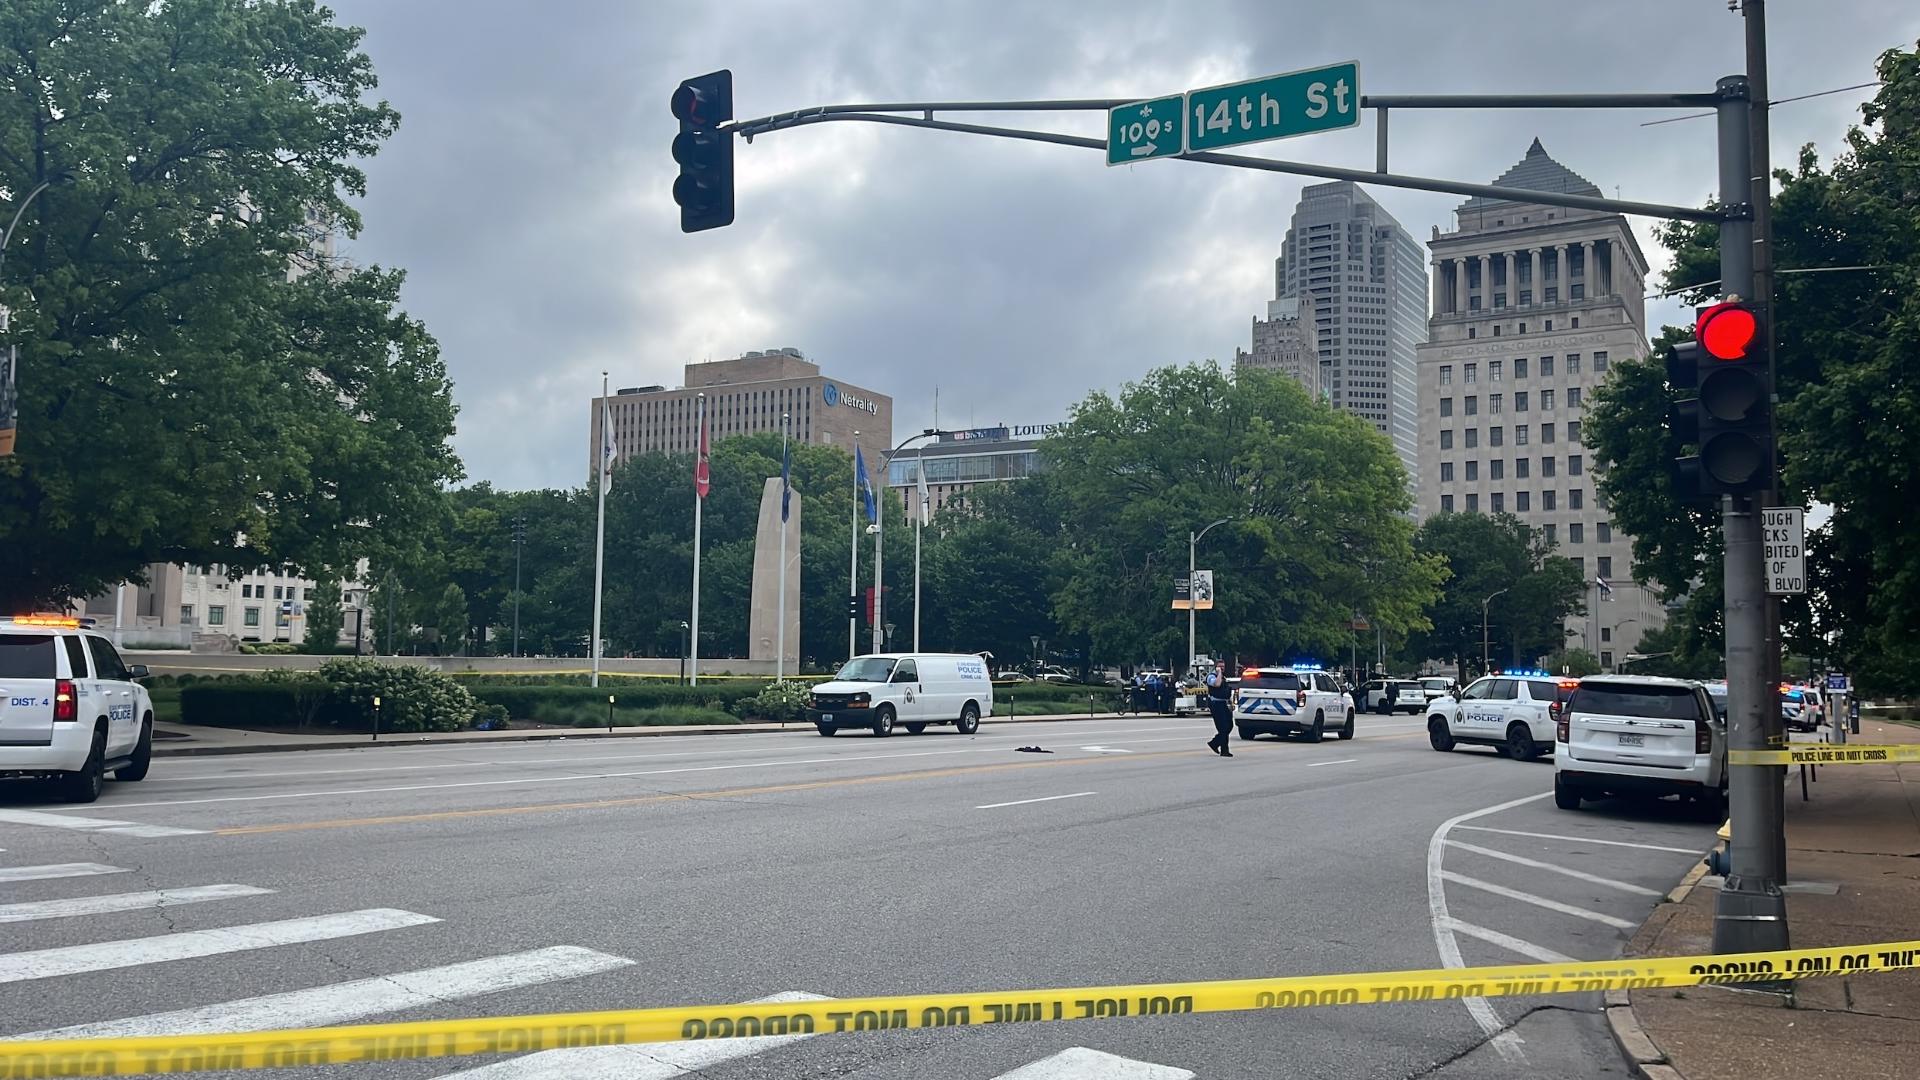 The shooting happened at about 7:30 a.m. in downtown St. Louis. Police aid the officer pulled out his gun and fired shots, striking and killing one of the men.